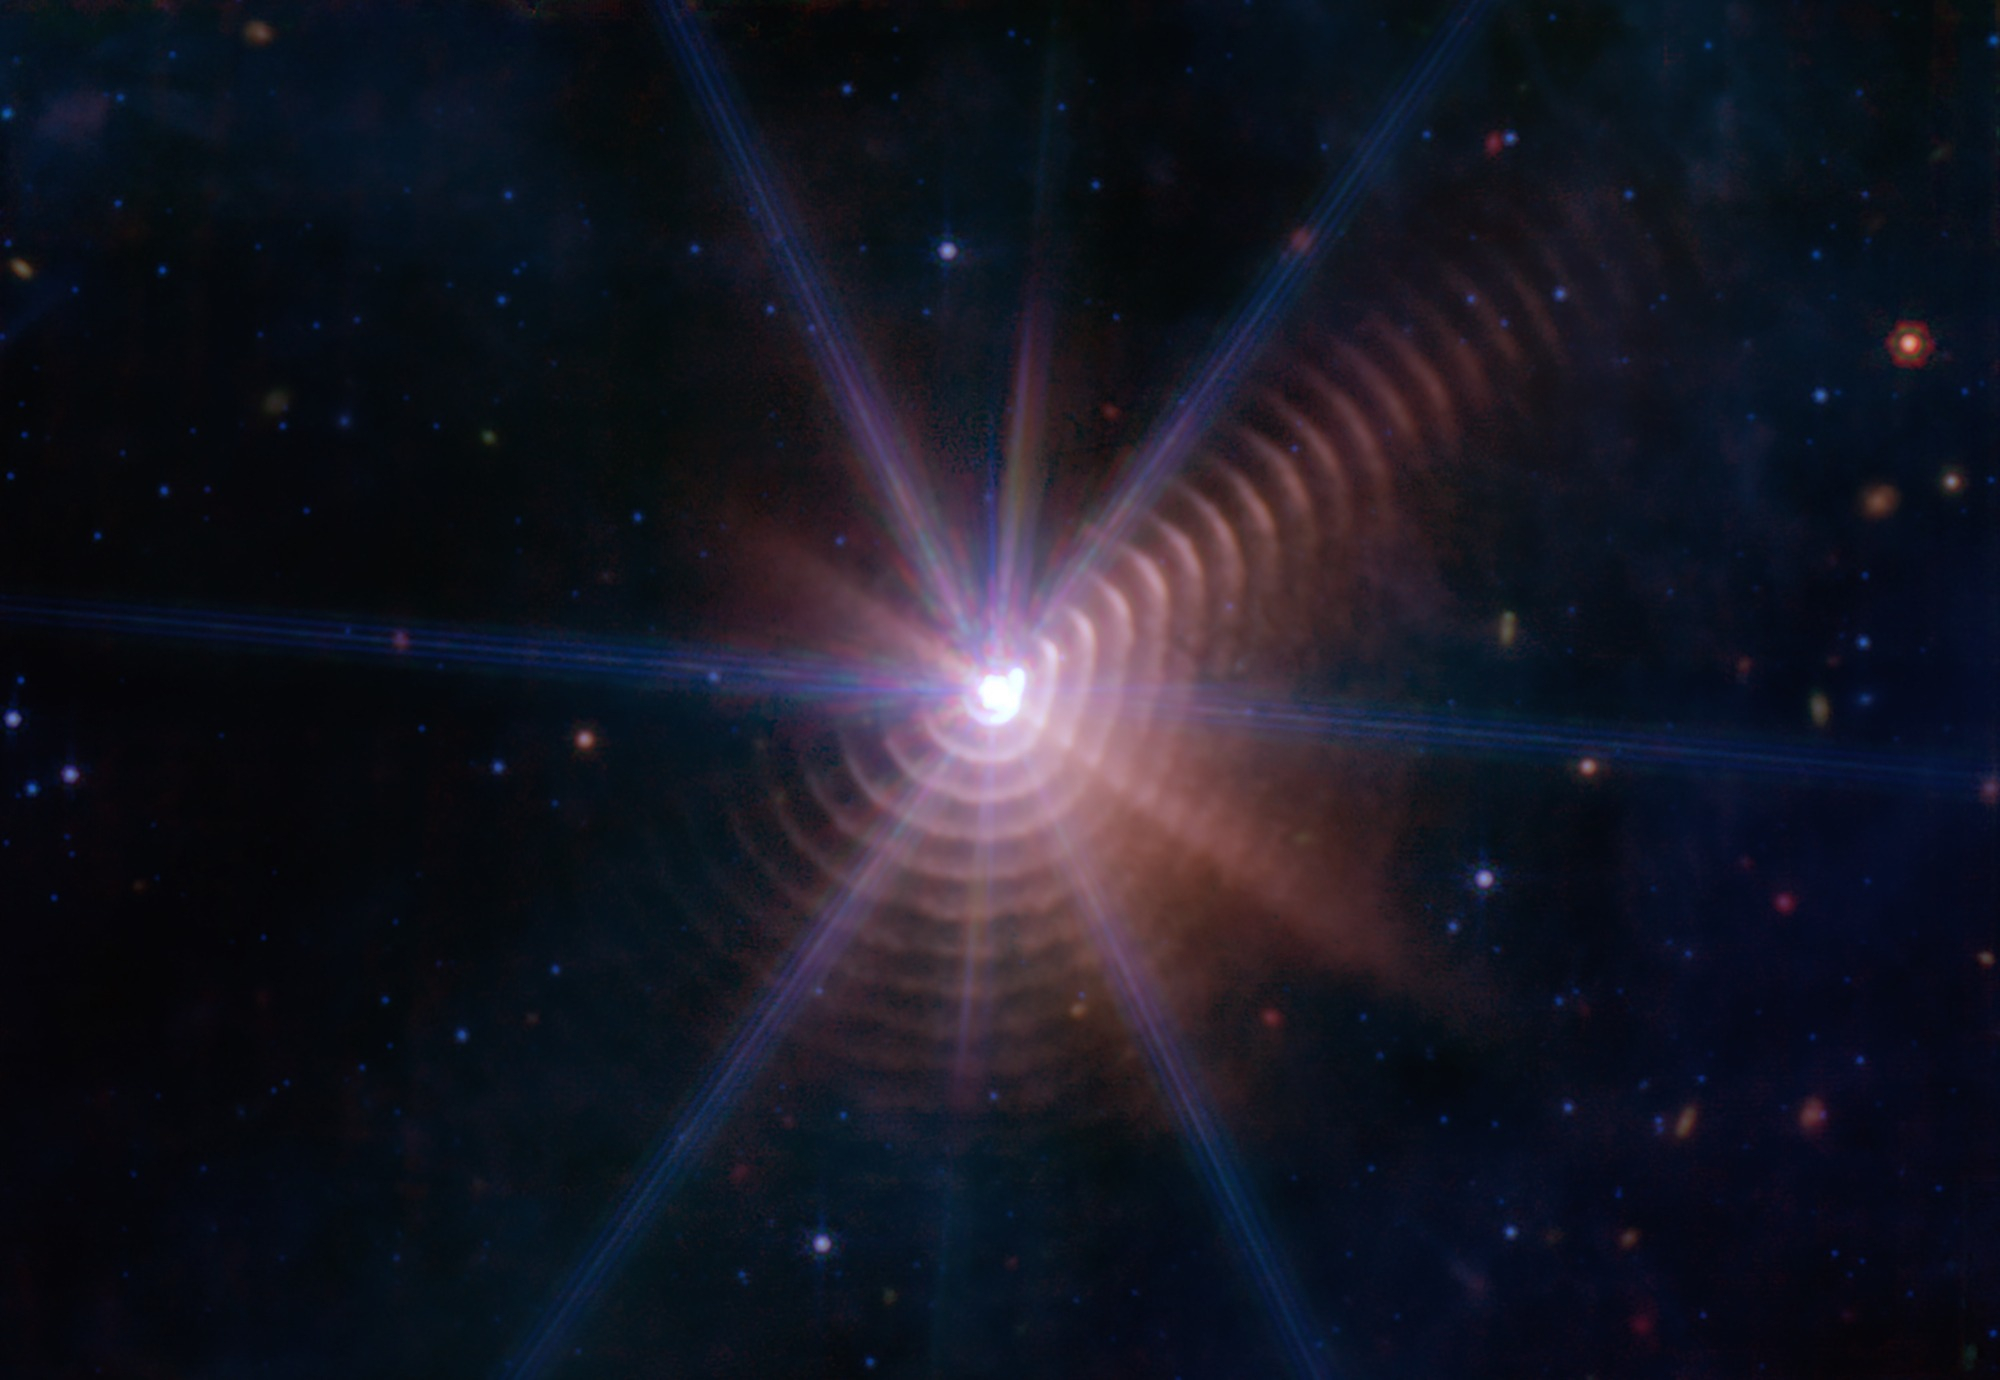 Image captured by the James Webb Space Telescope showing star binary WD140's concentric dust rings.